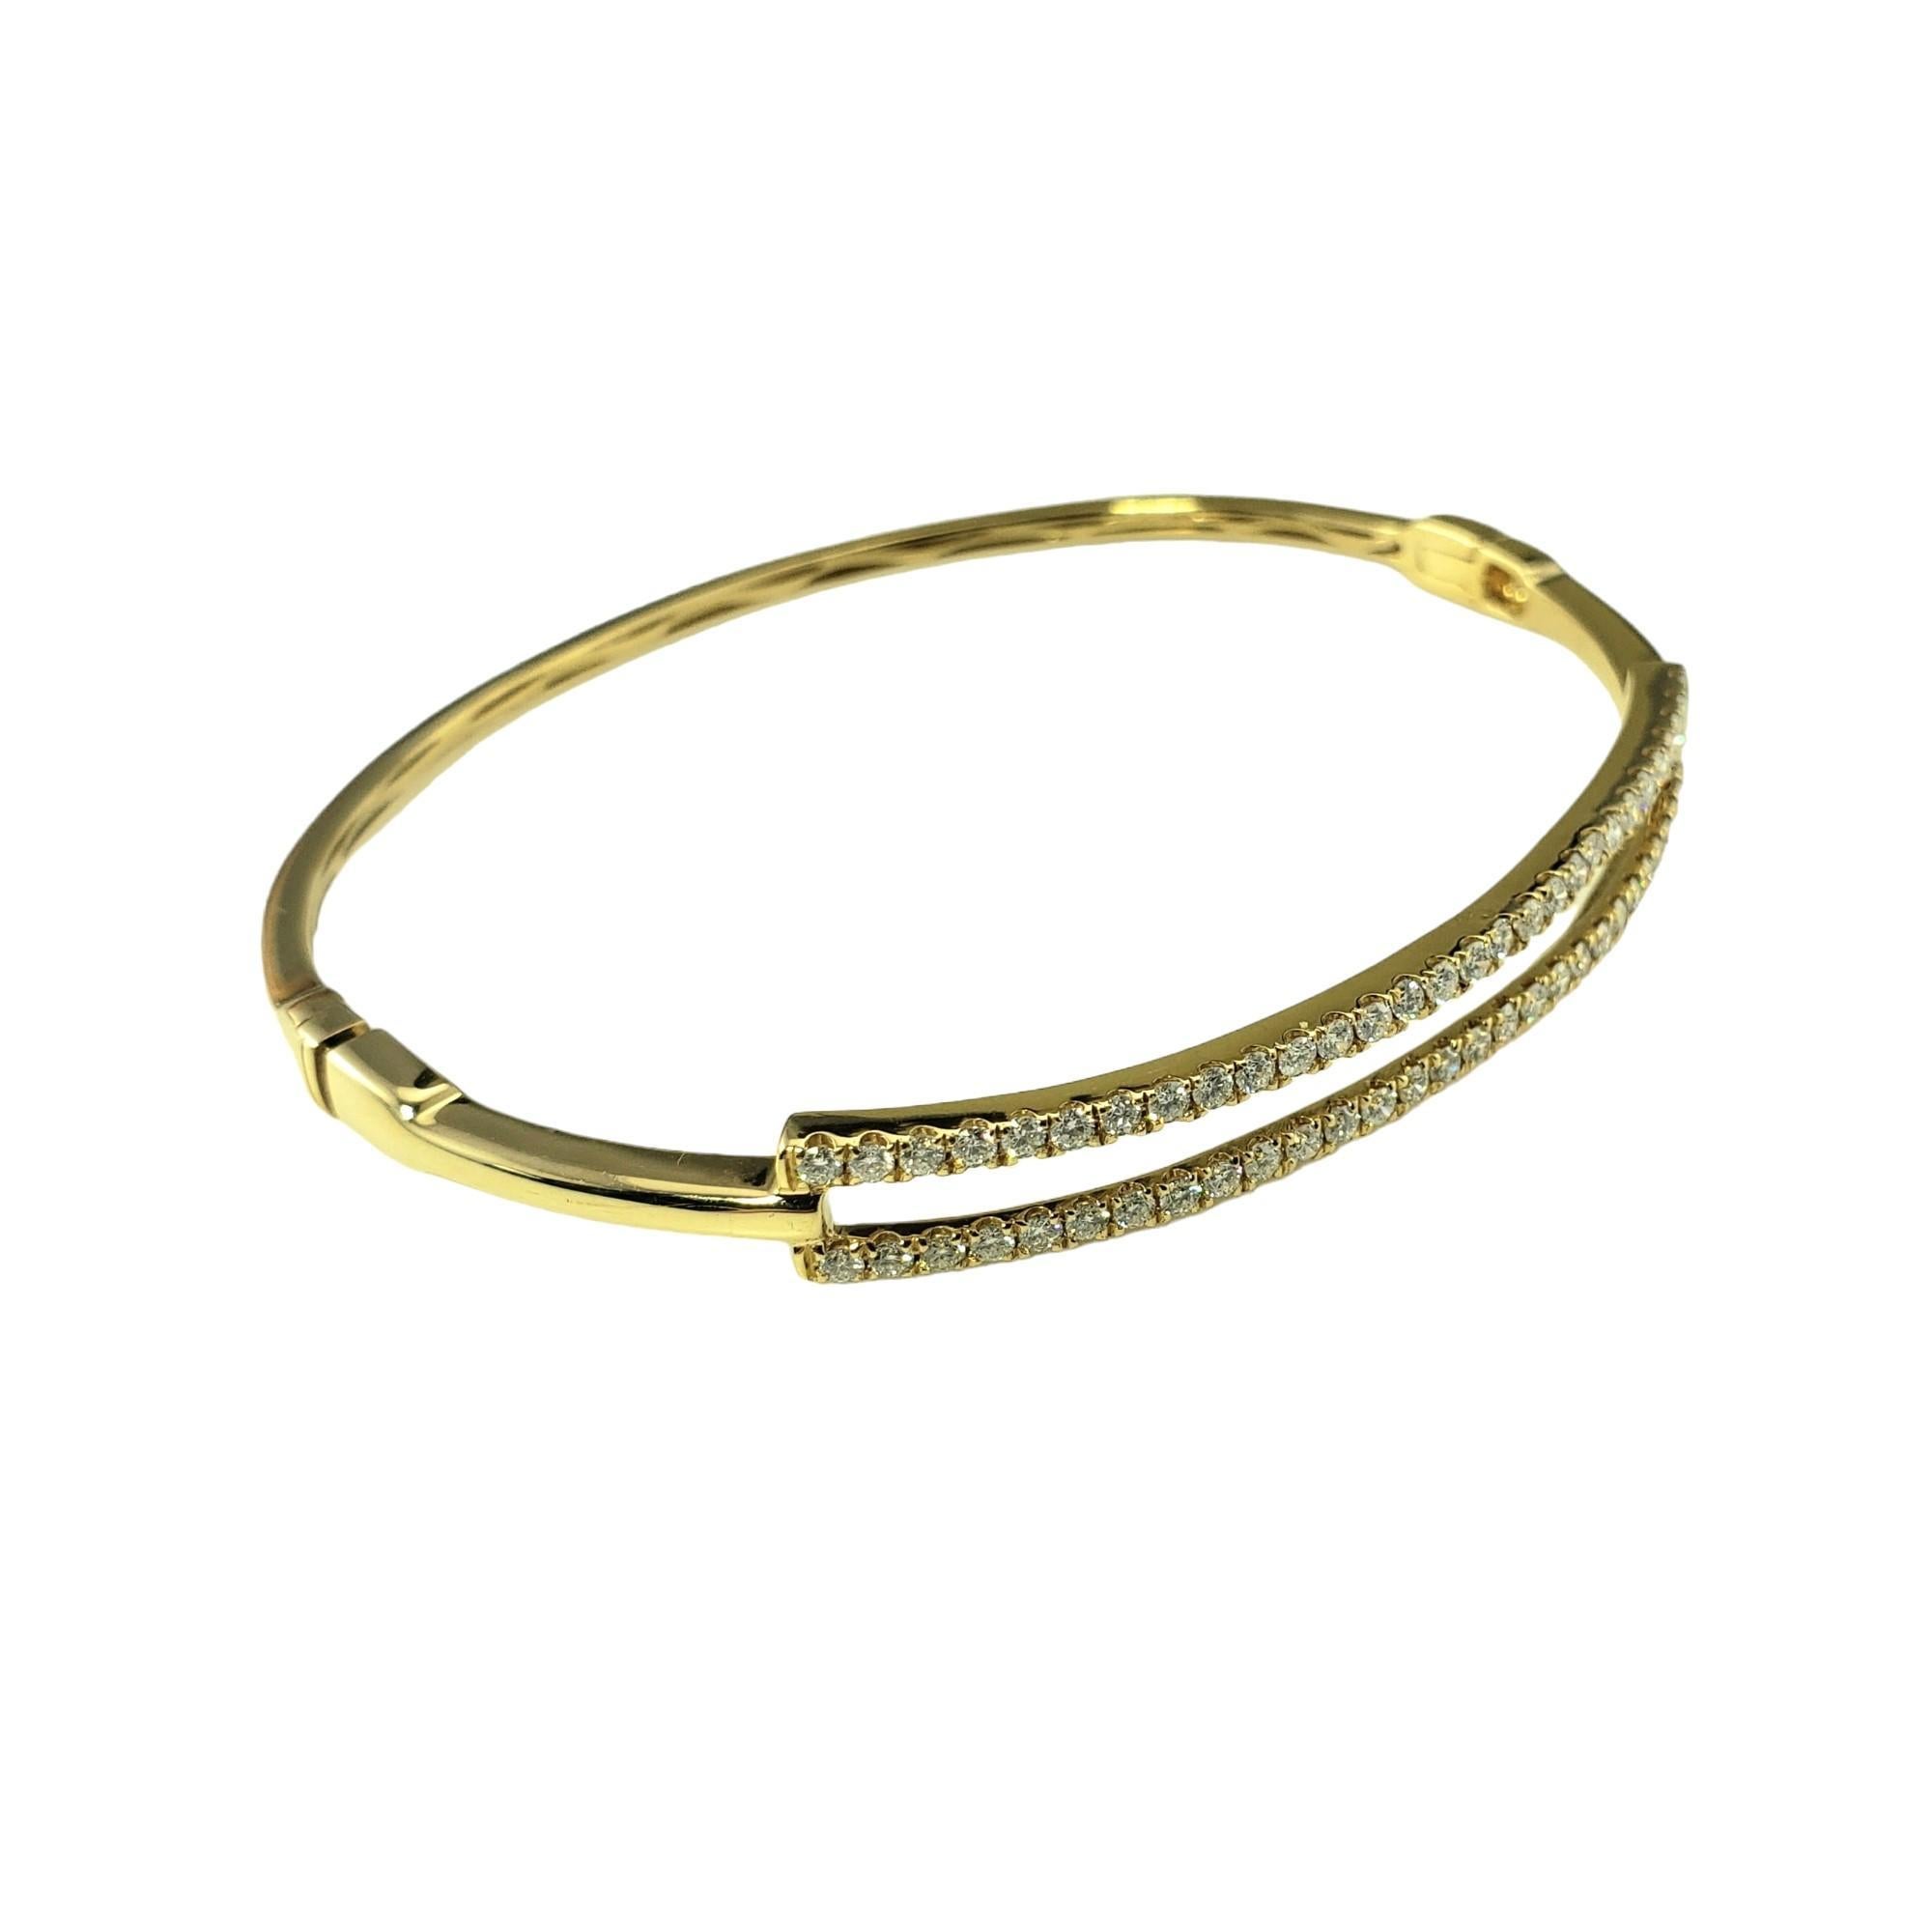 18 Karat Yellow Gold and Double Diamond Row Bangle Bracelet #17050 In Good Condition For Sale In Washington Depot, CT